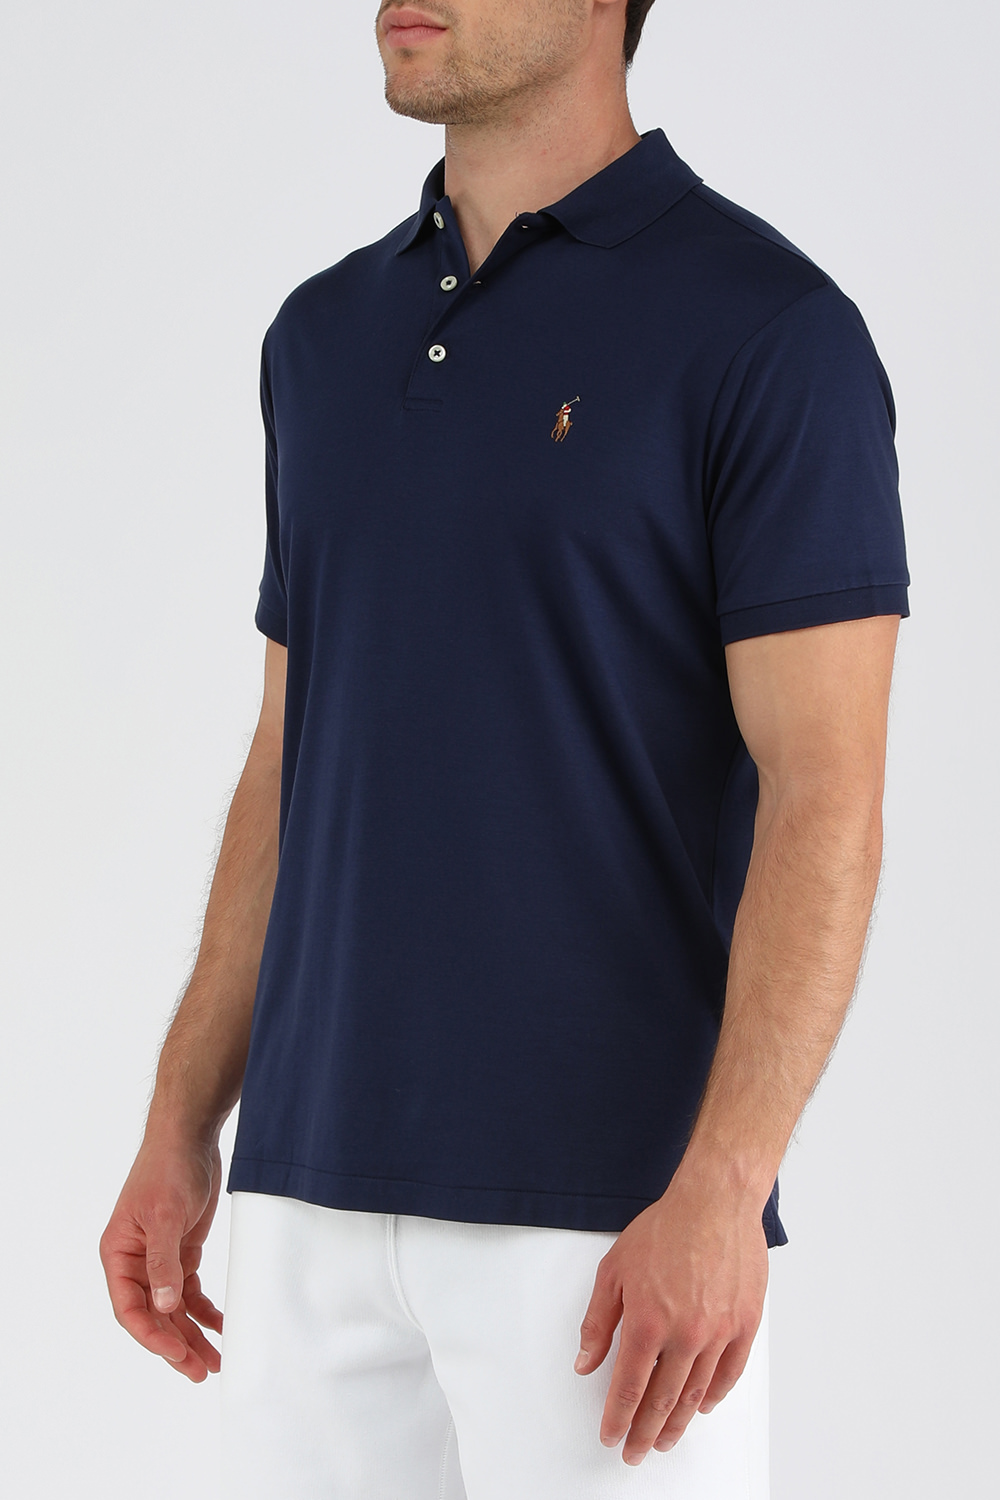 Slim Fit Polo Shirt in Navy POLO RALPH LAUREN